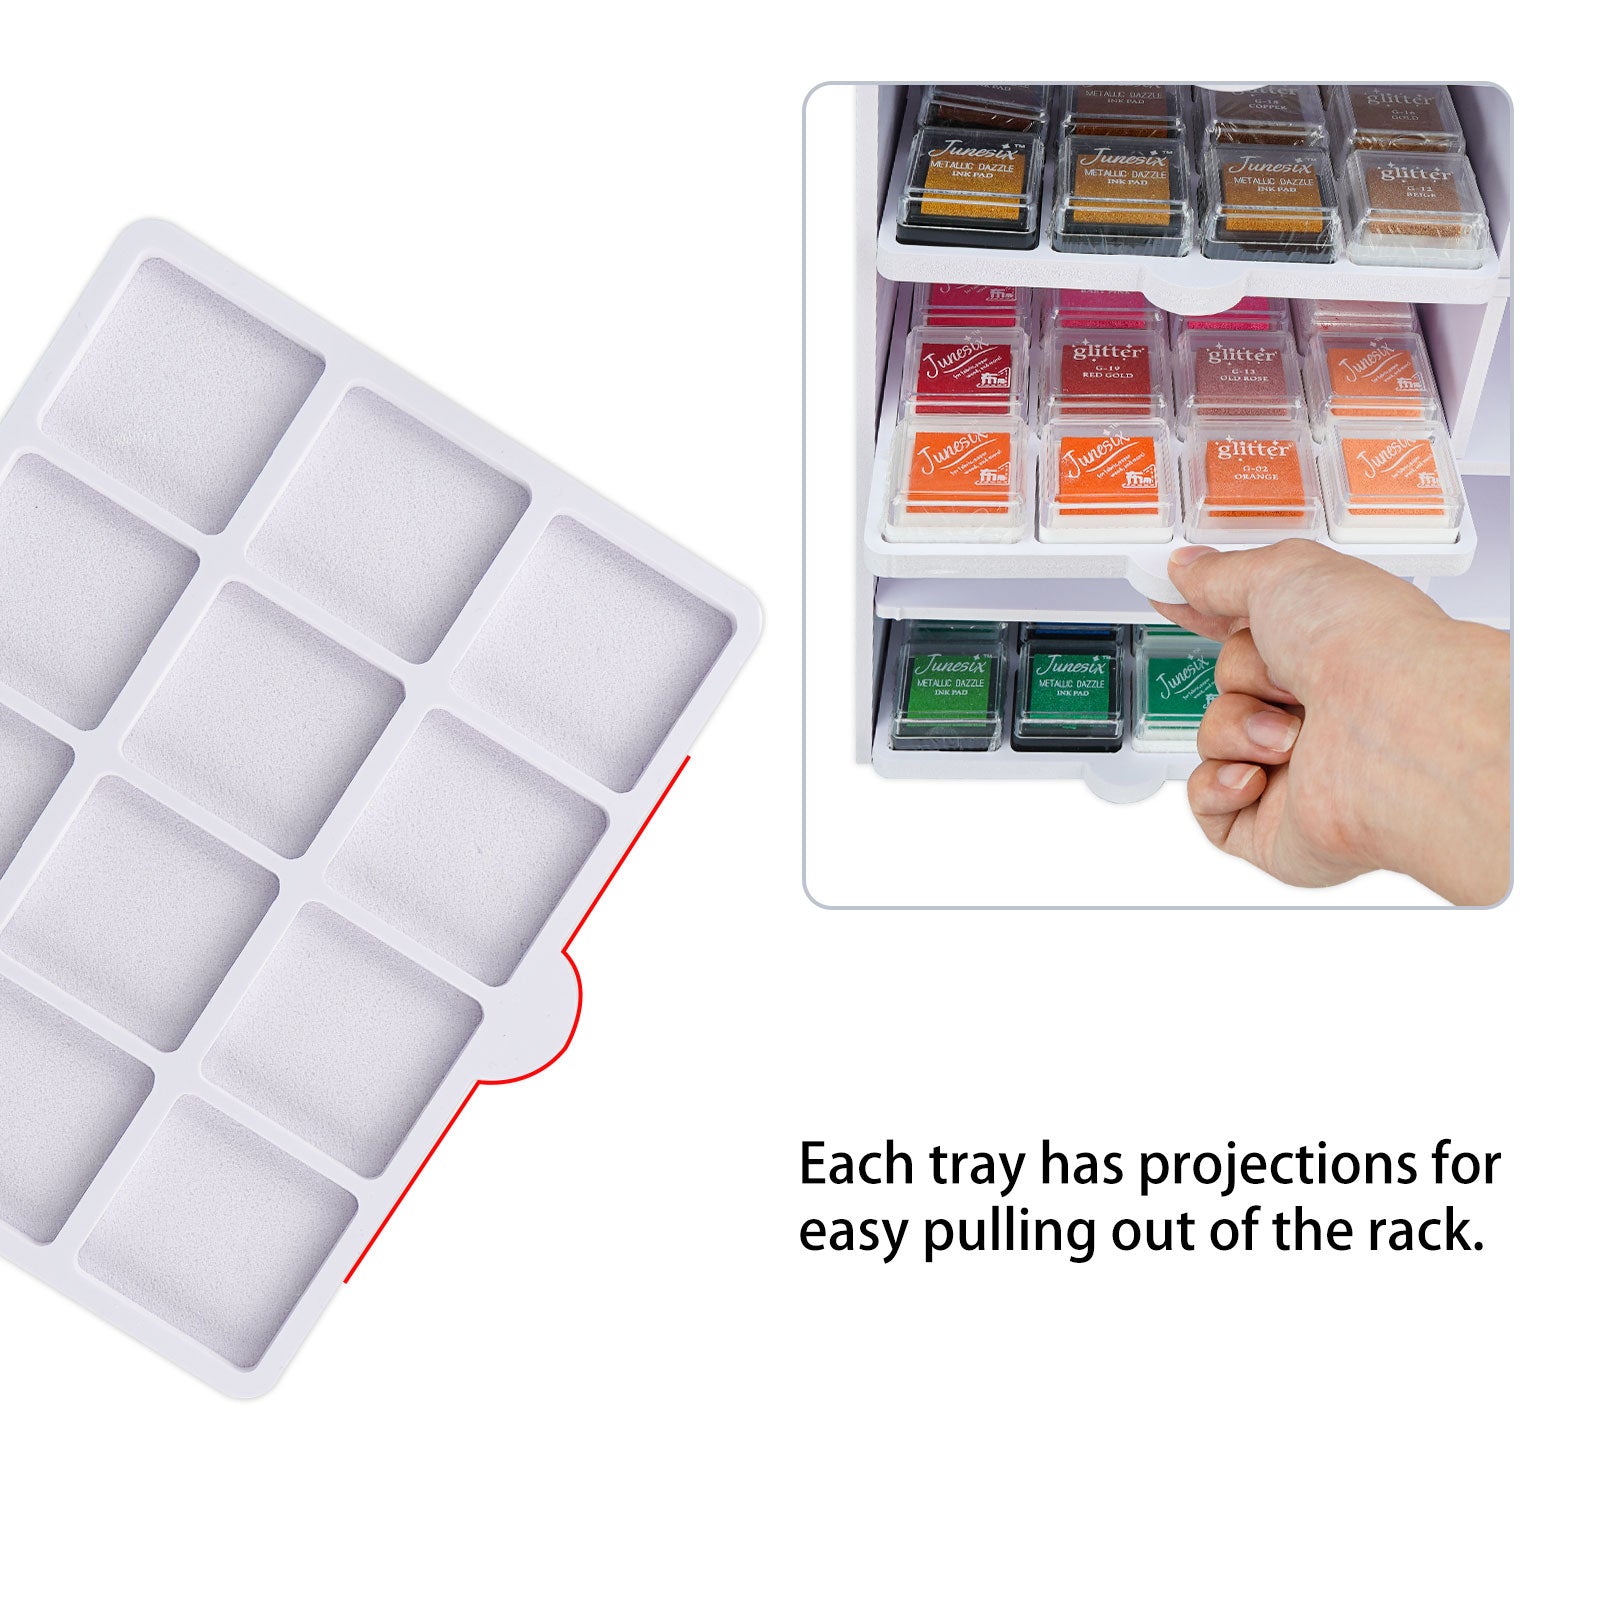  Sanfurney 10 Slots Ink Pad Tray Organizer Rack Compatible with  Mini Distress Ink Pad Tray, Drop Ink Pad Tray, Mini Archival Ink Pad Tray  (Trays are not Included) Stamp Pad Supplies